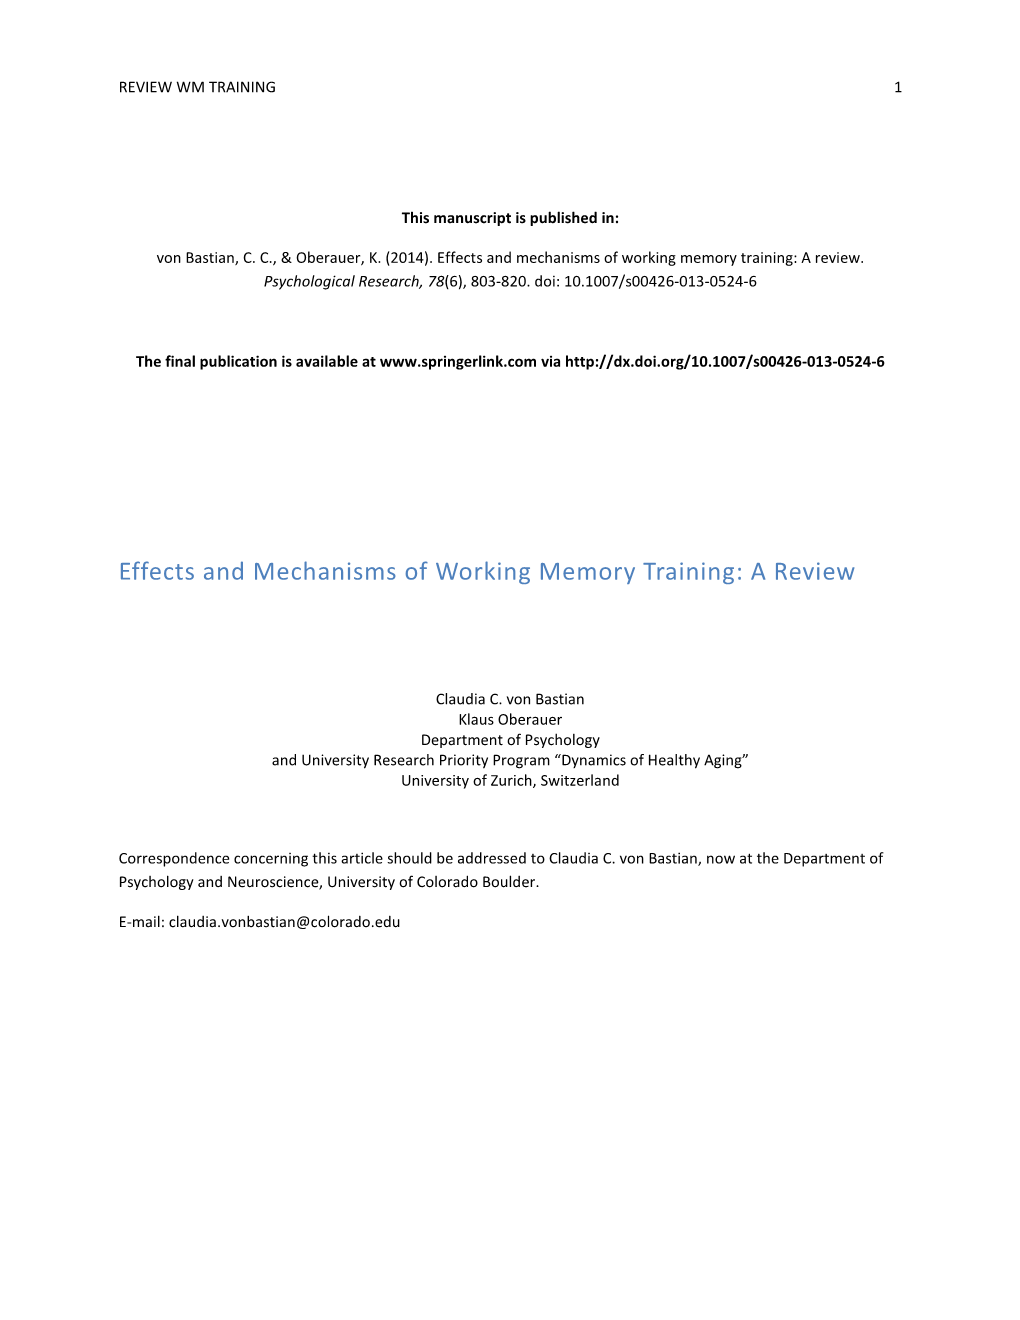 Effects and Mechanisms of Working Memory Training: a Review